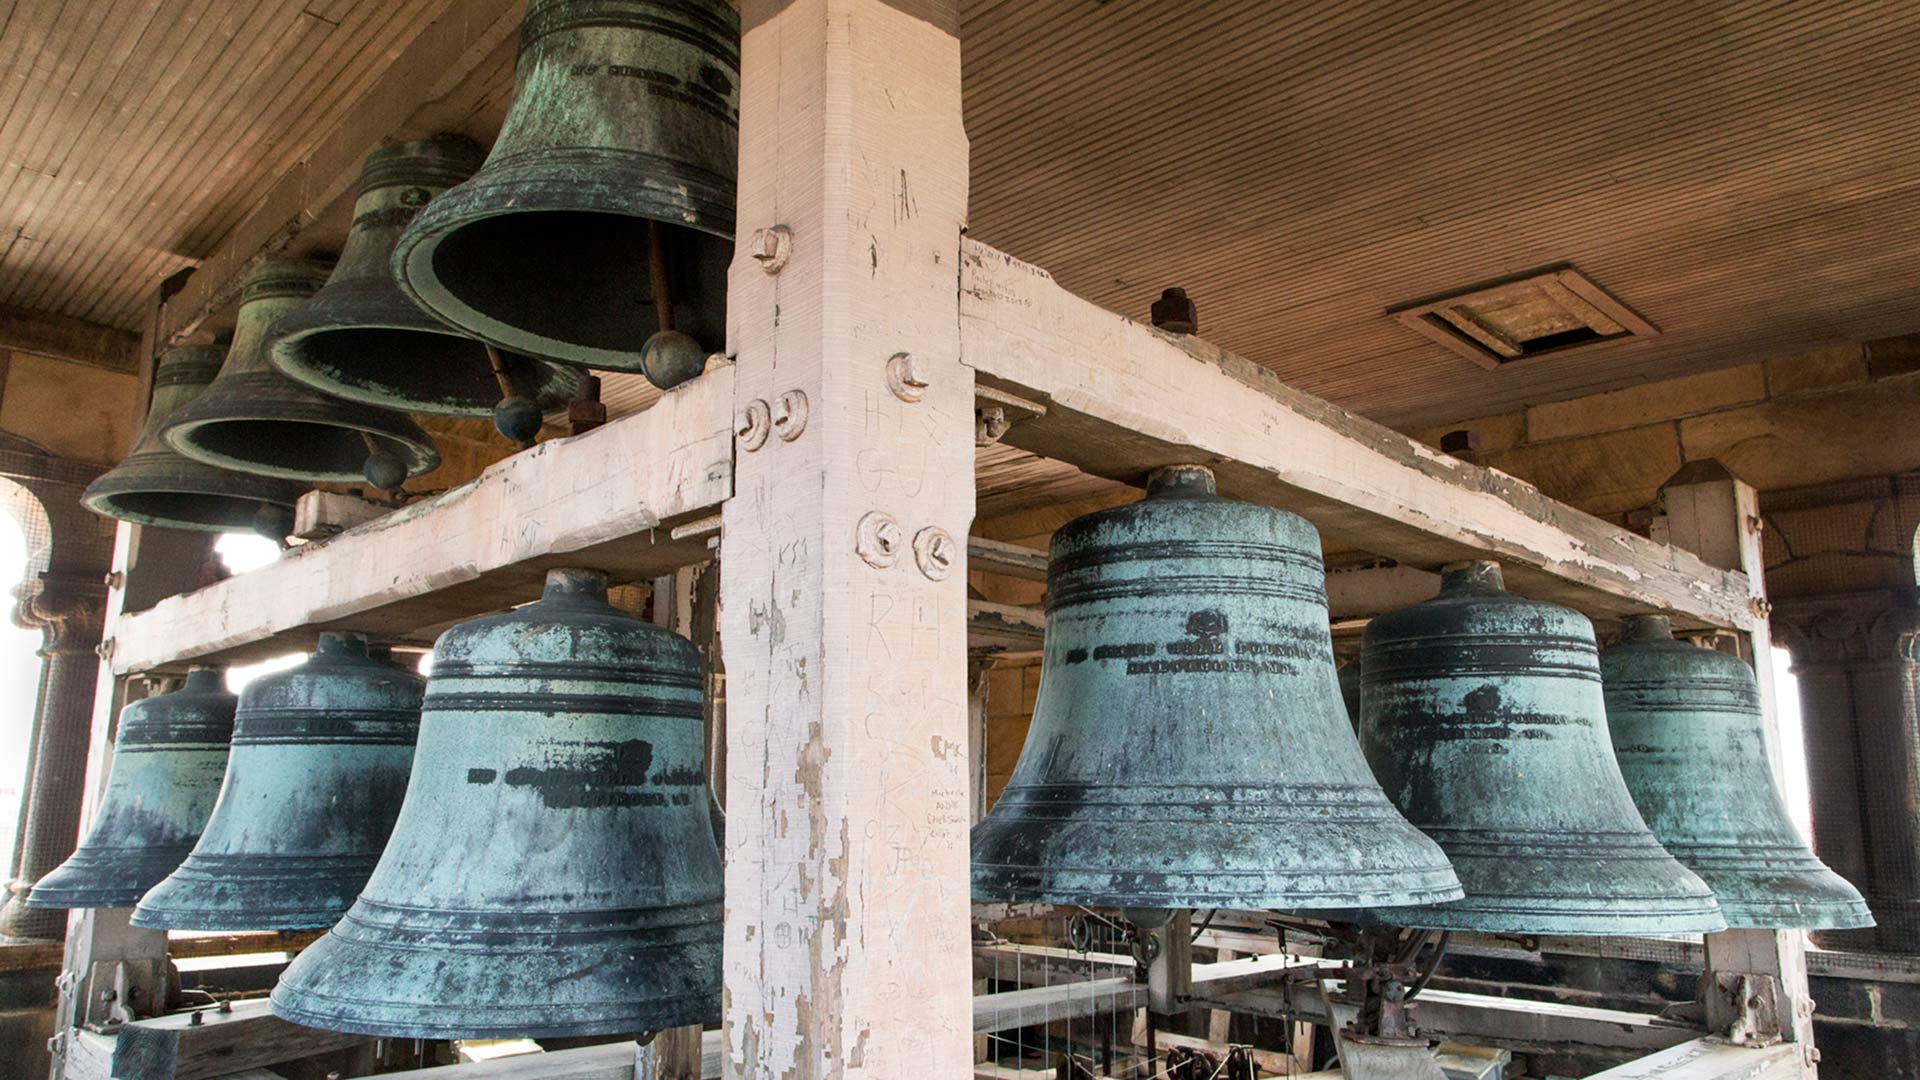 Large bells, textured bluish gray hanging from wooden beams